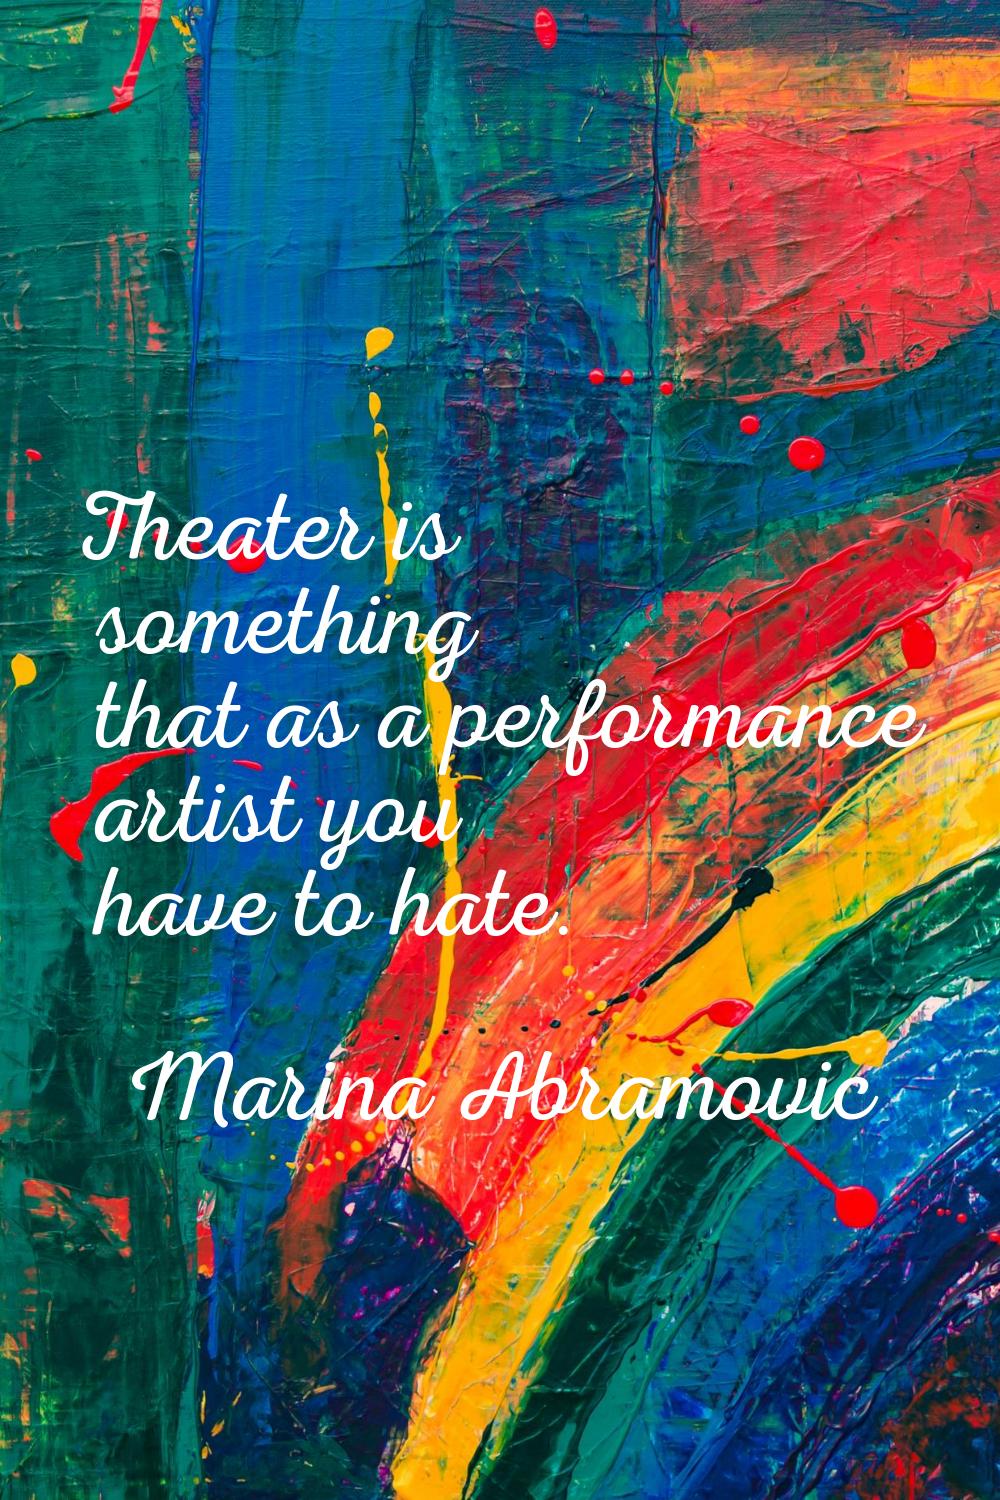 Theater is something that as a performance artist you have to hate.